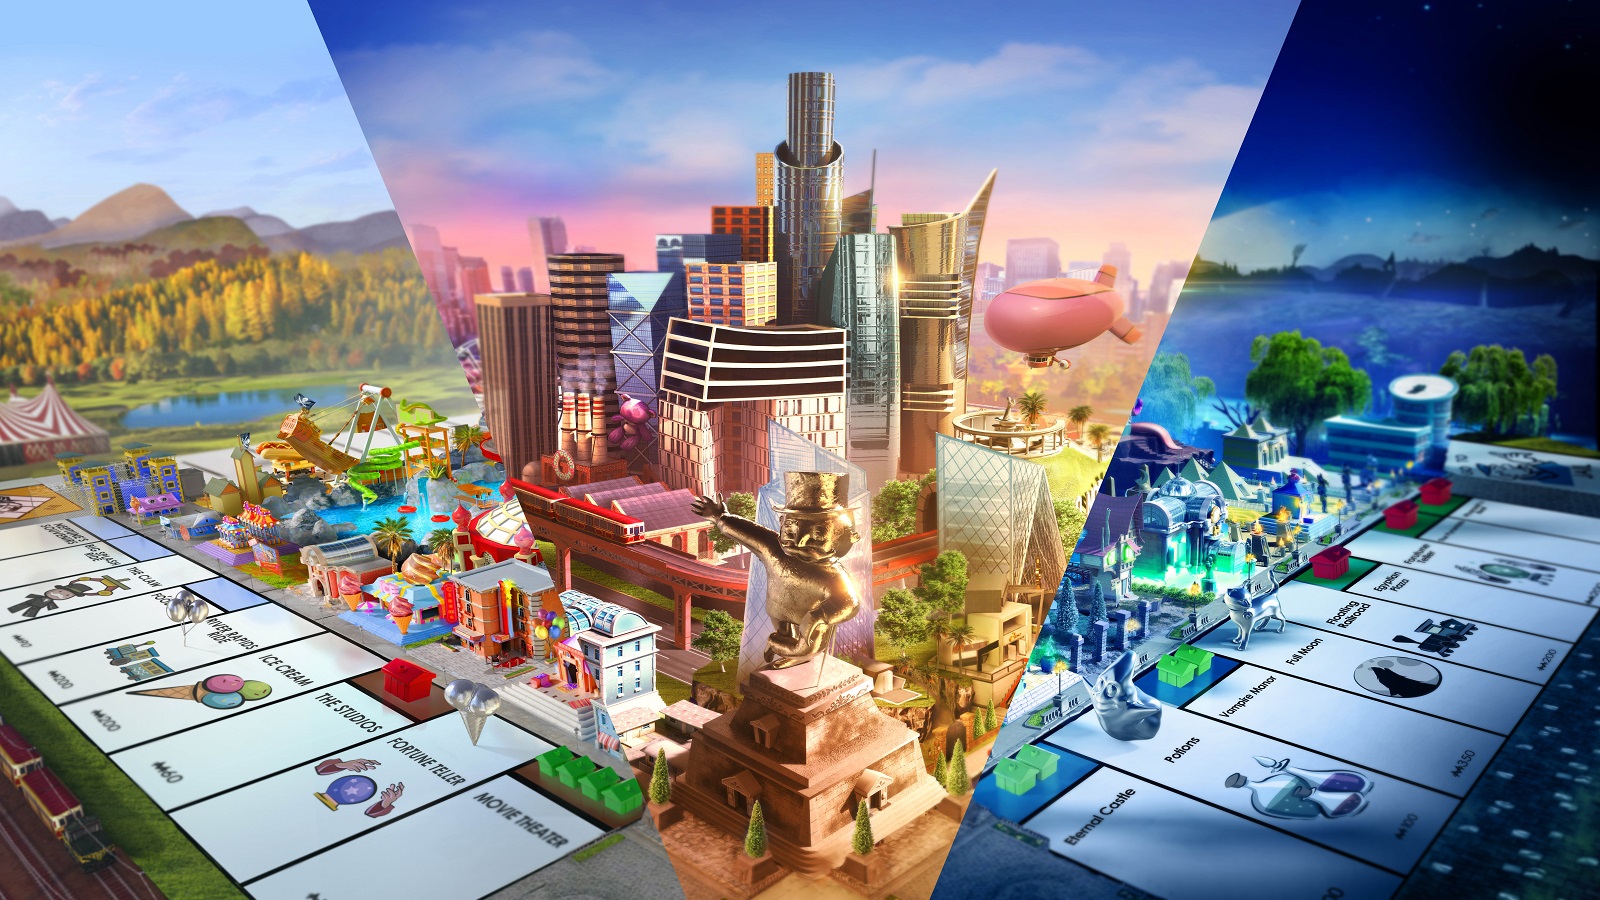 Monopoly Go! is now available on mobile devices — GAMINGTREND